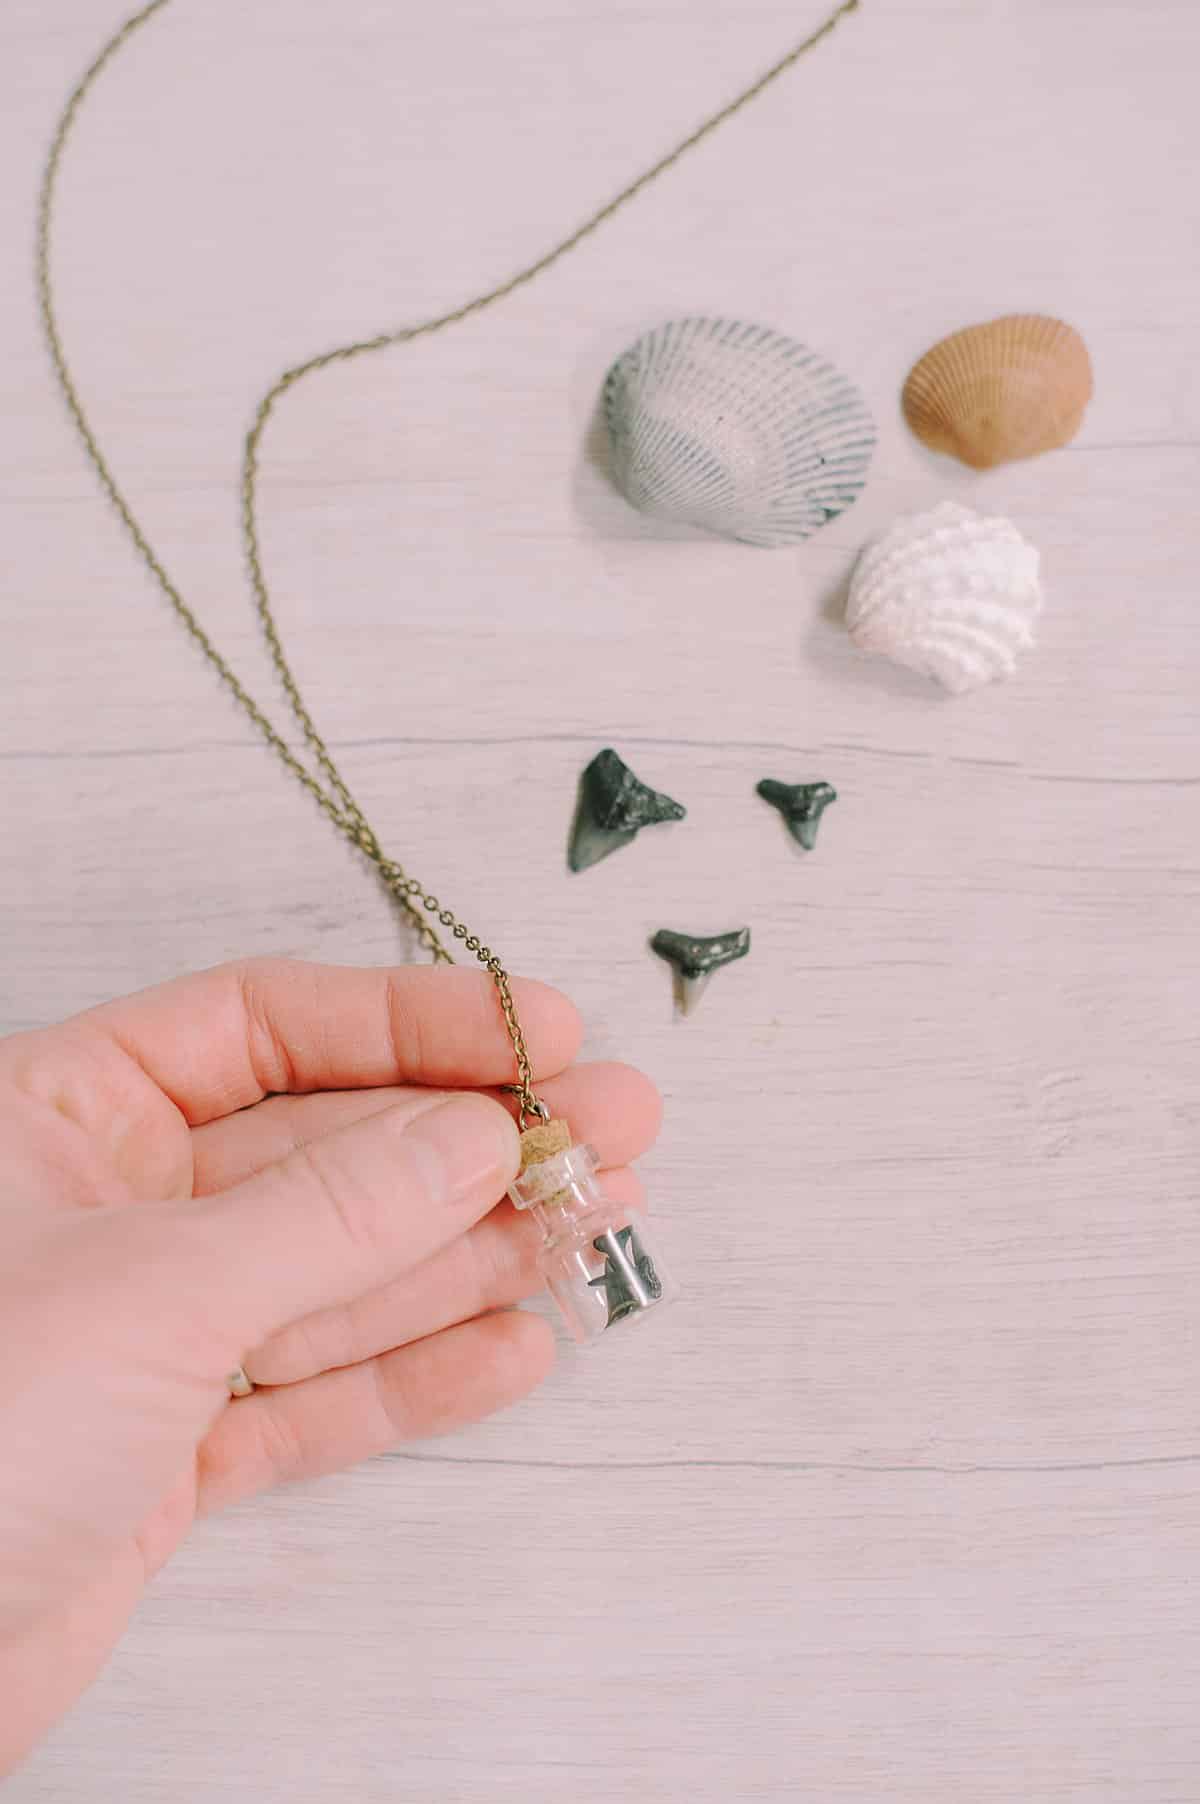 sharks teeth with glass jar as a necklace